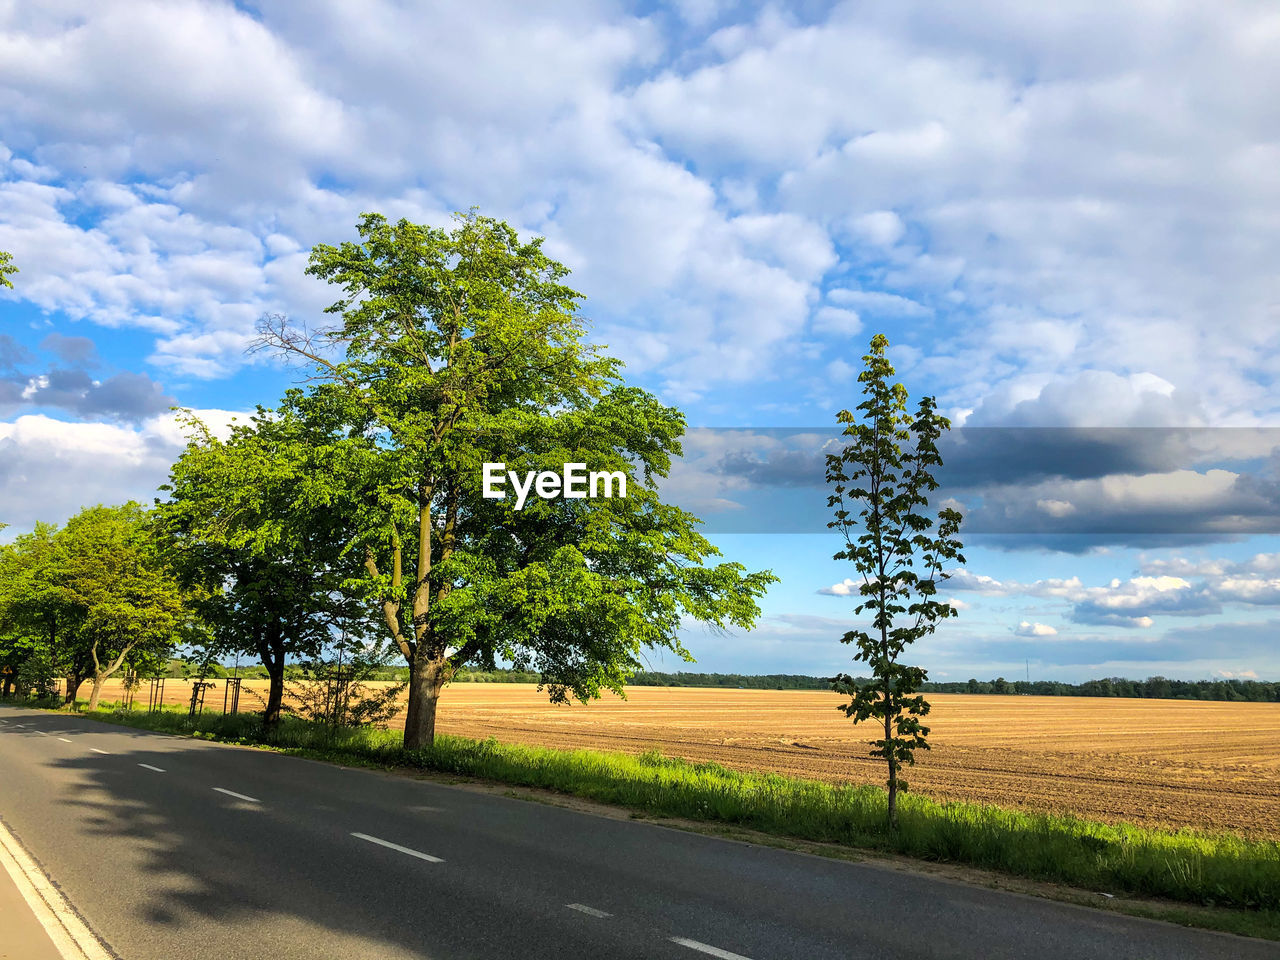 Trees on field by road against sky